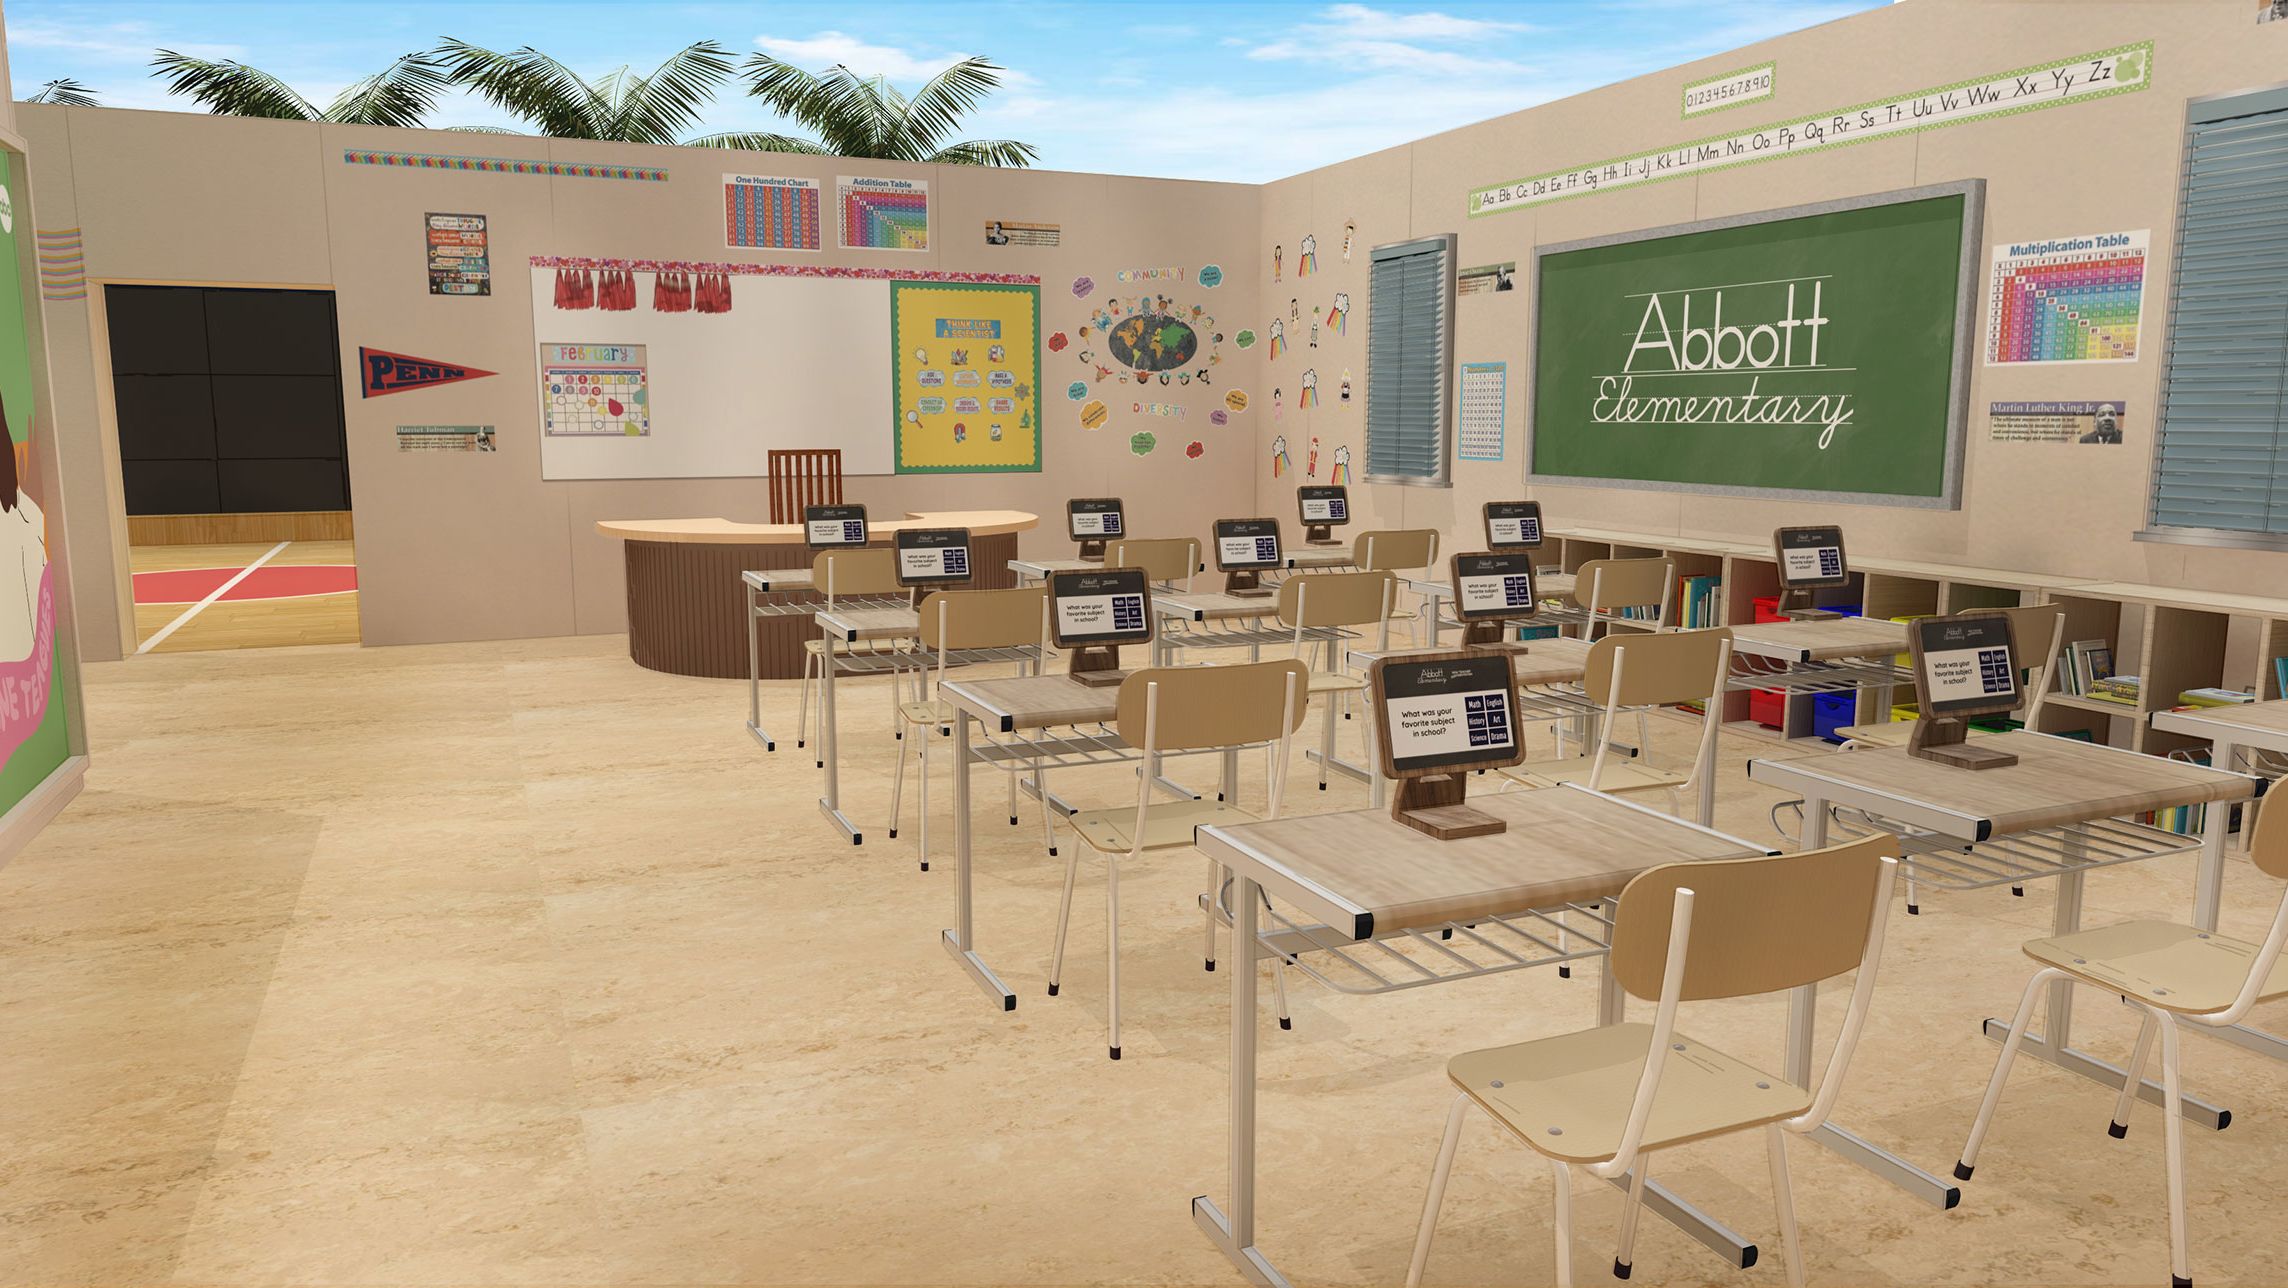 A rendering of a classroom from "Abbott Elementary."